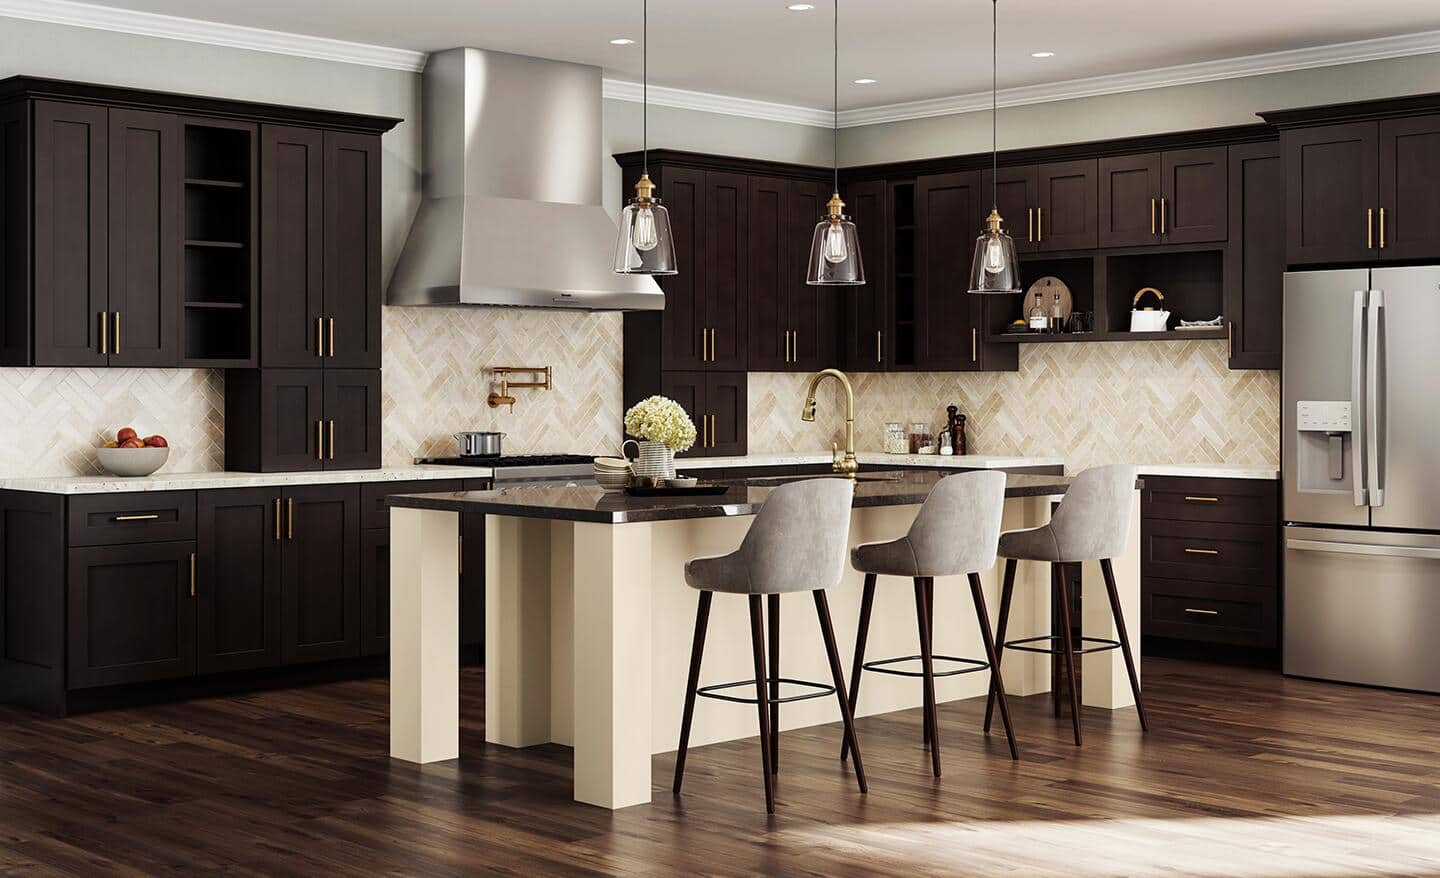 A kitchen featuring modern cabinetry with a dark stained finish.